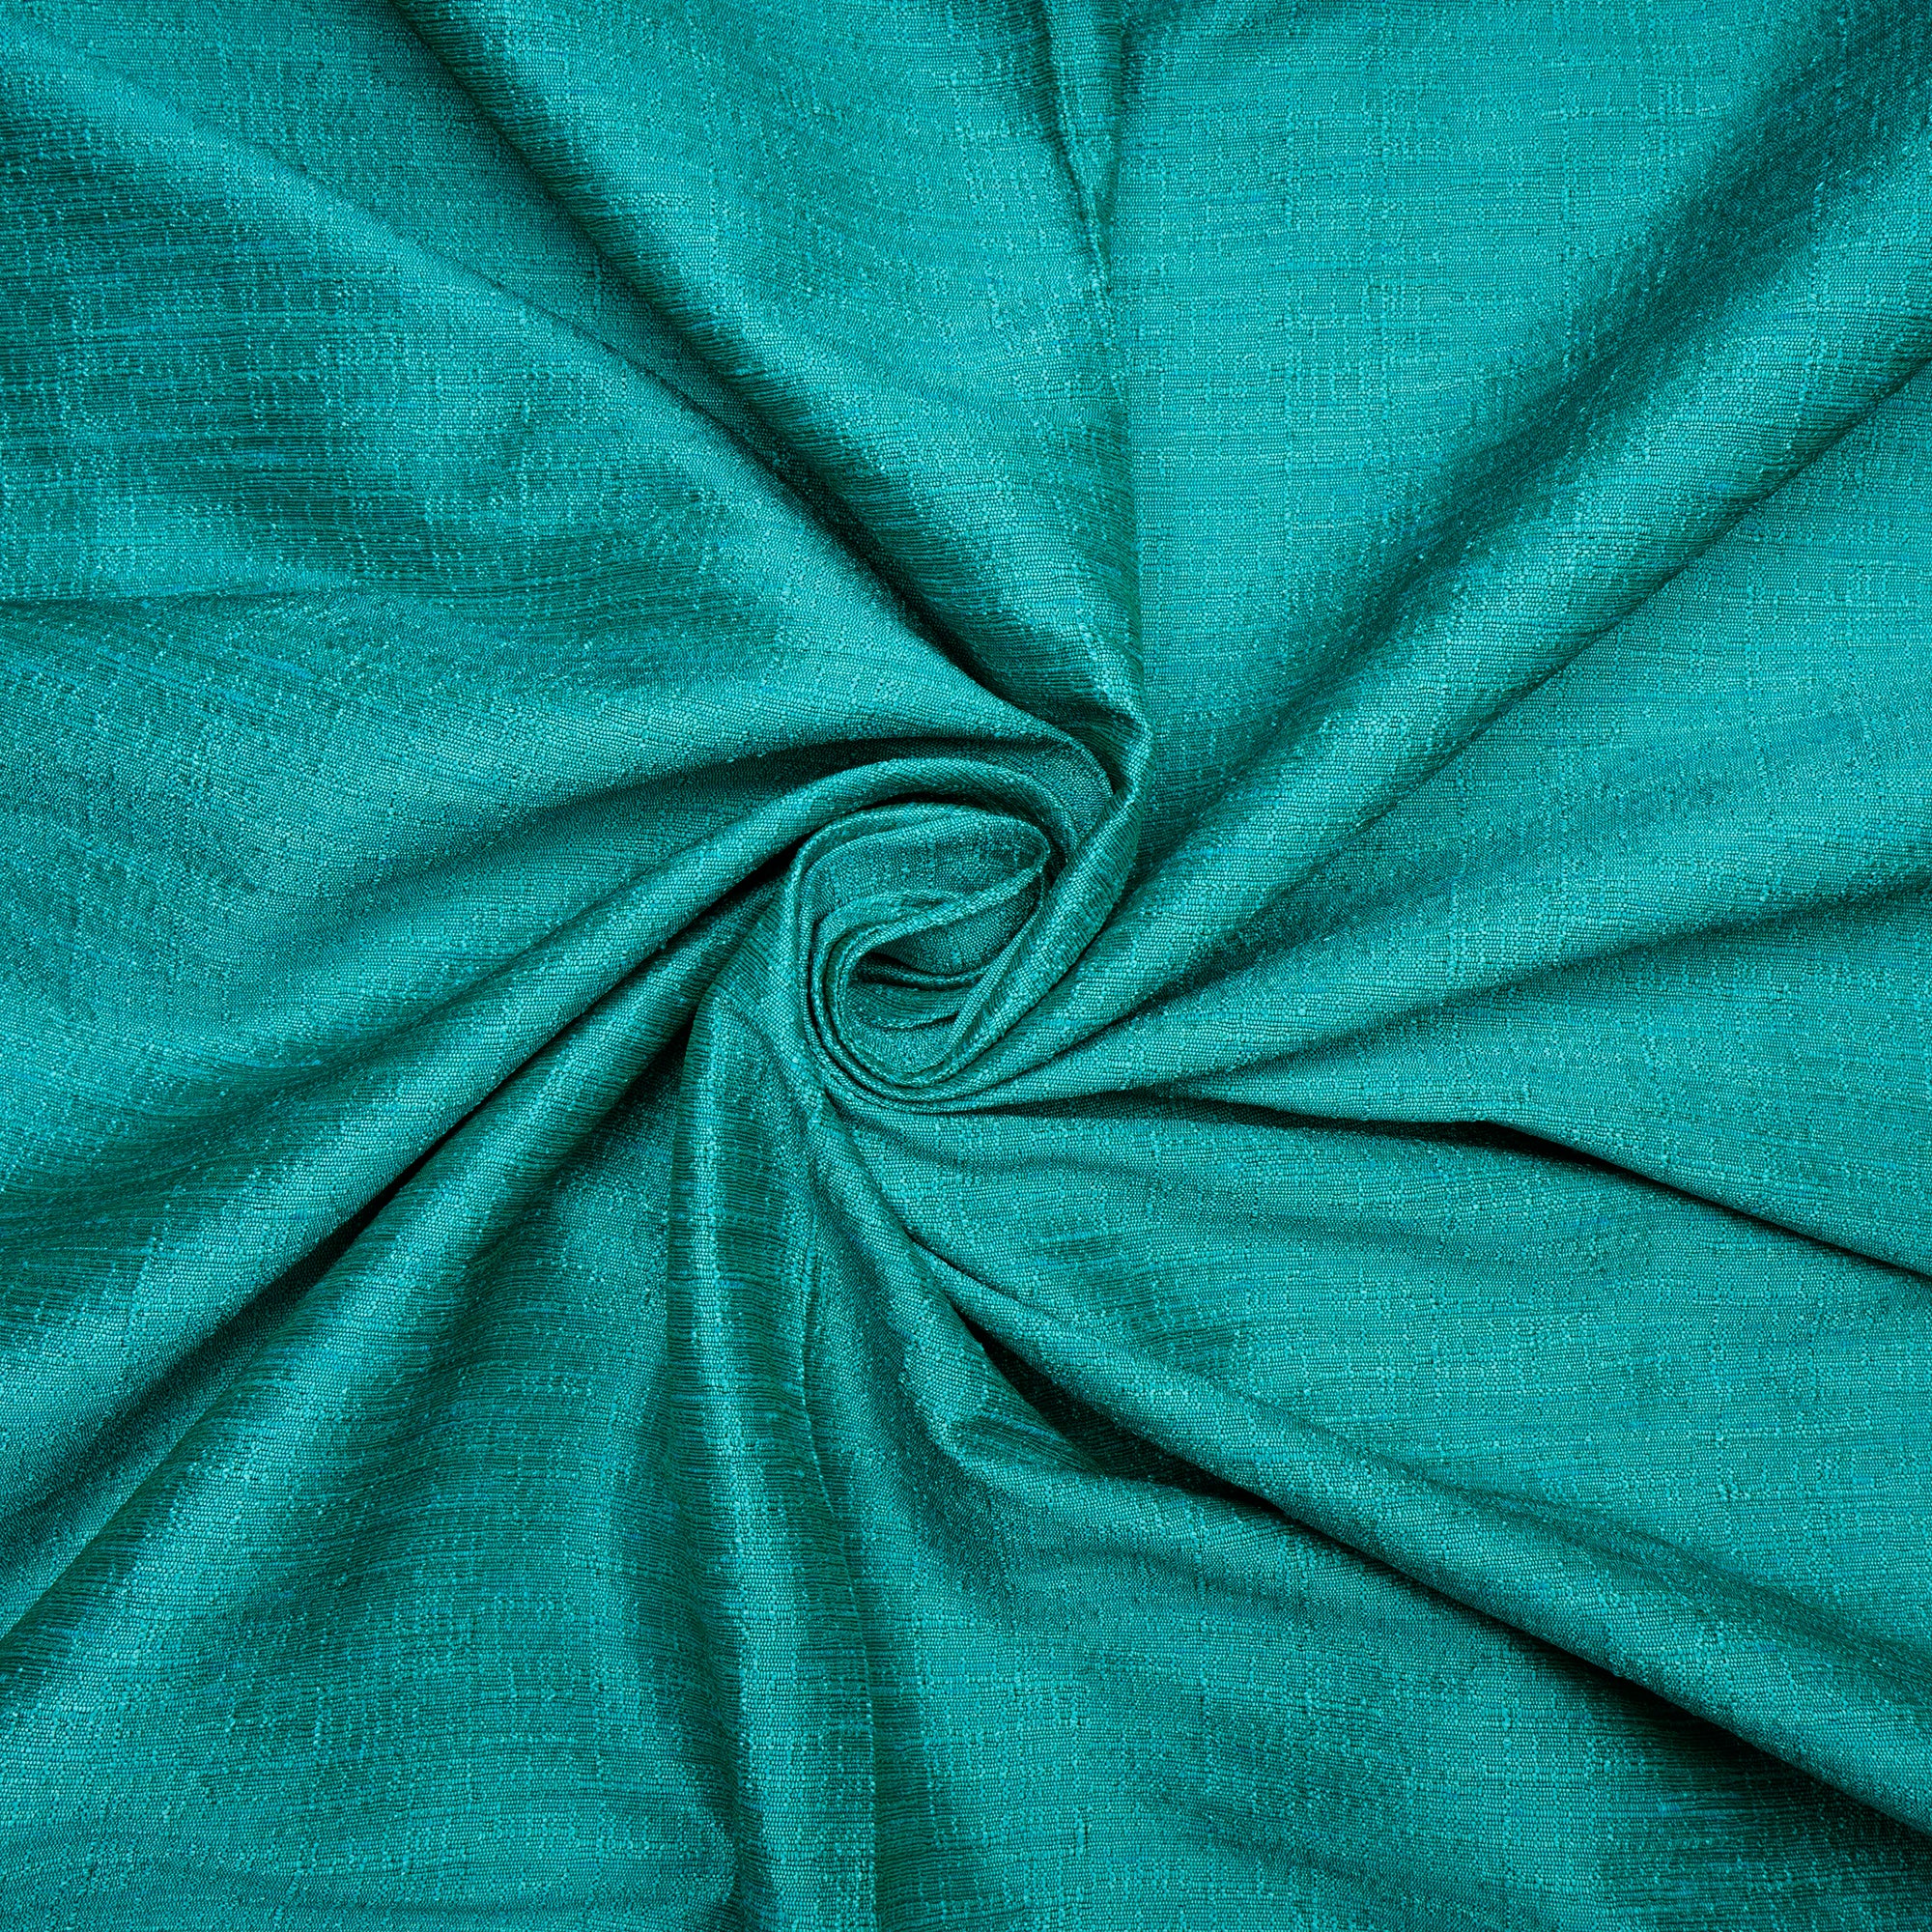 Medium Turquoise Color Polyester Dupion Fabric